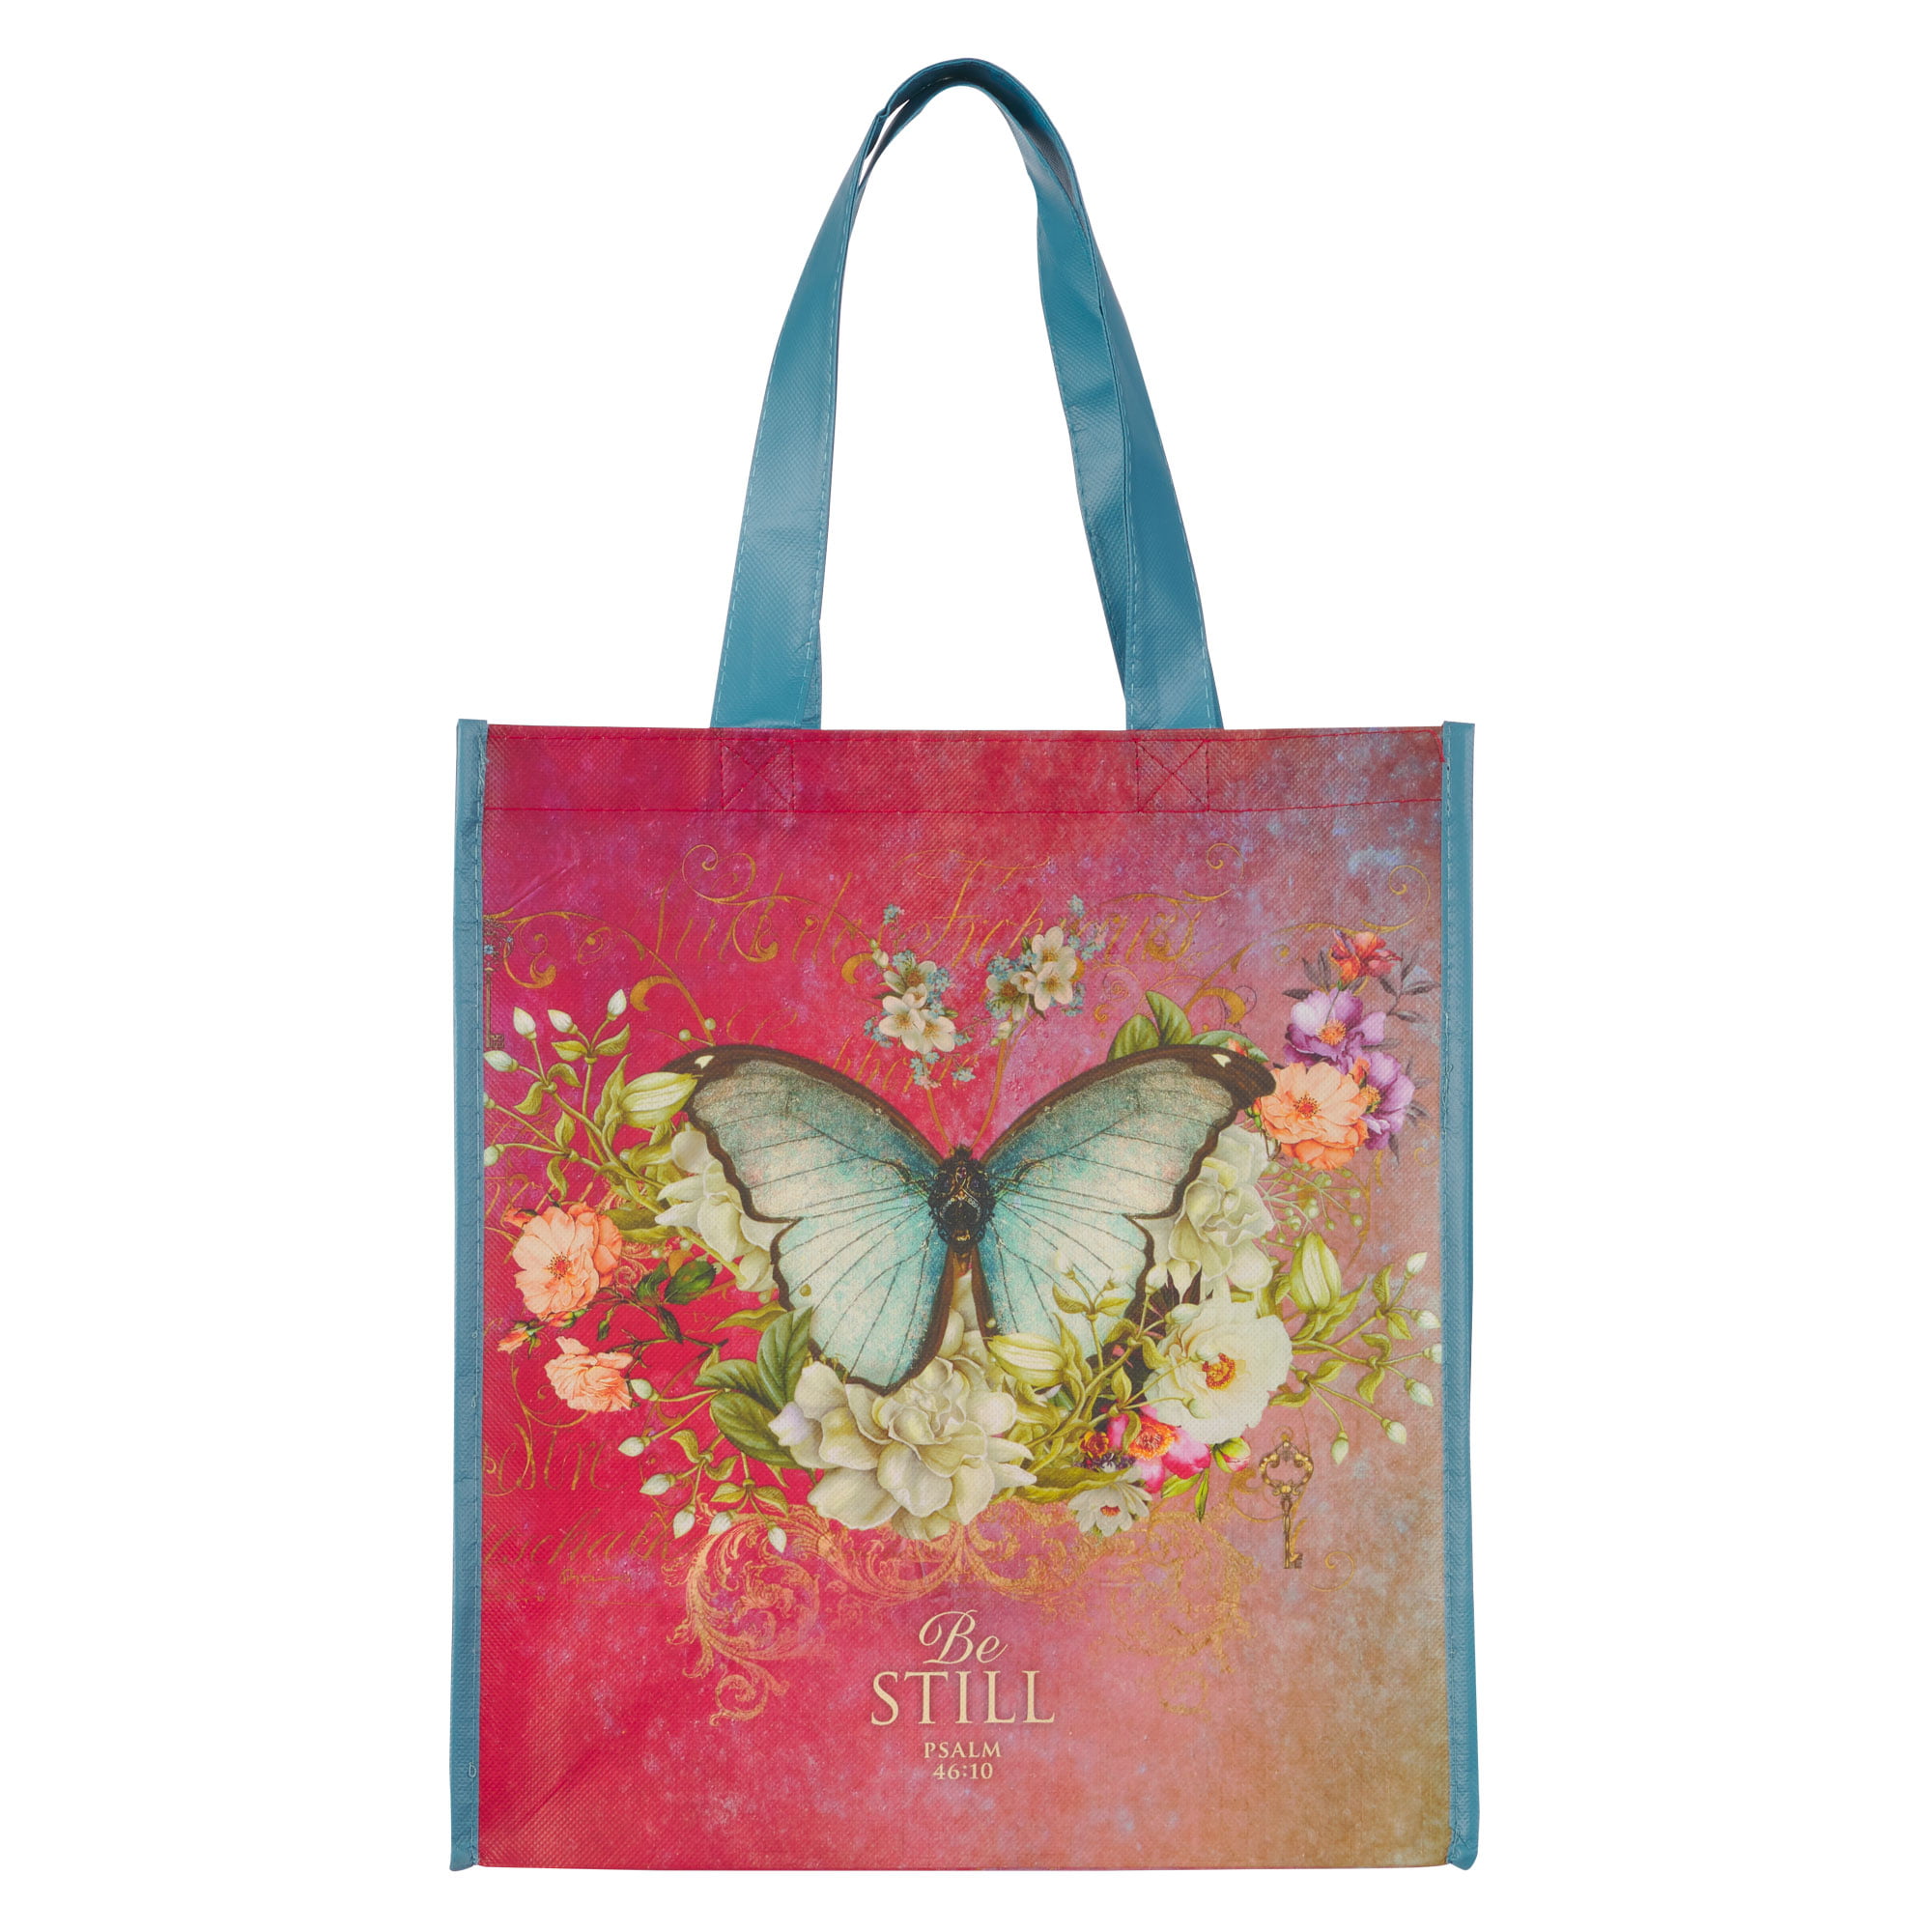 Fruit of the Spirit Butterfly Tote Bag Christian Tote Bag Christian Tote  Bags Jesus Tote Bag Church Bible Bag Everyday Bag Butterfly Bag 